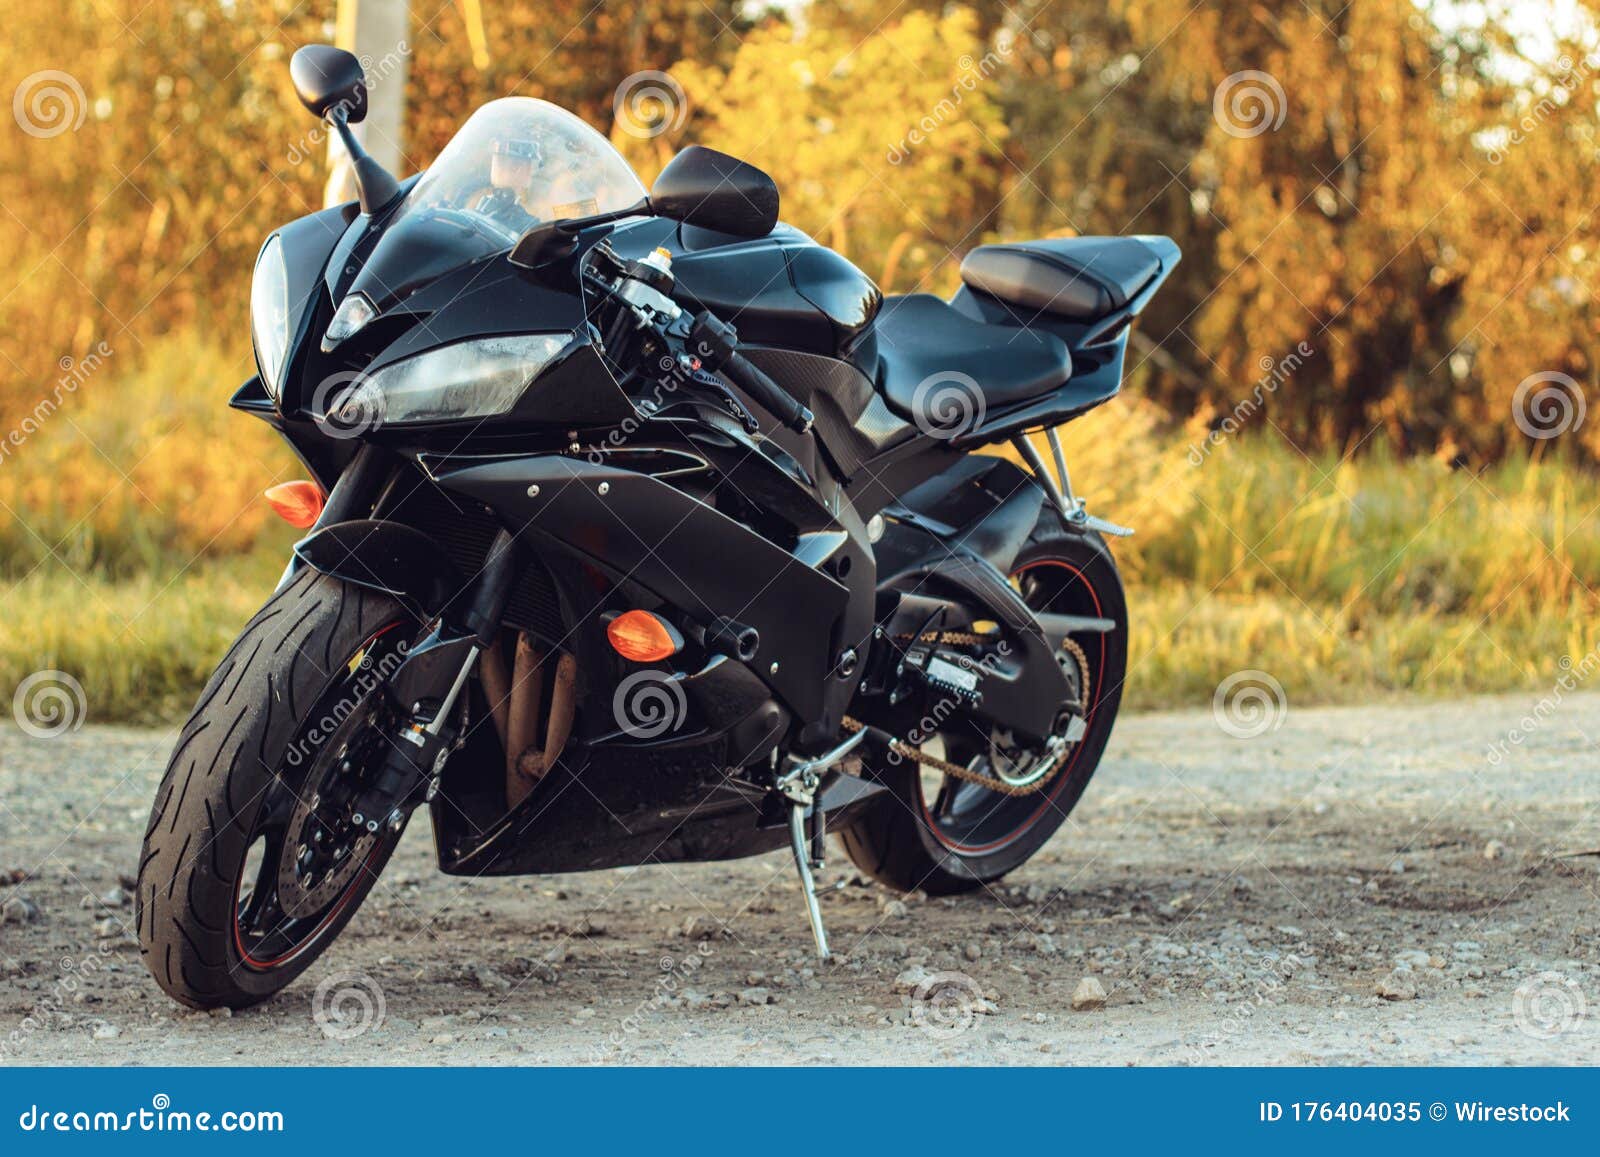 Black Sport Bike Parked on the Road with the Trees in the ...